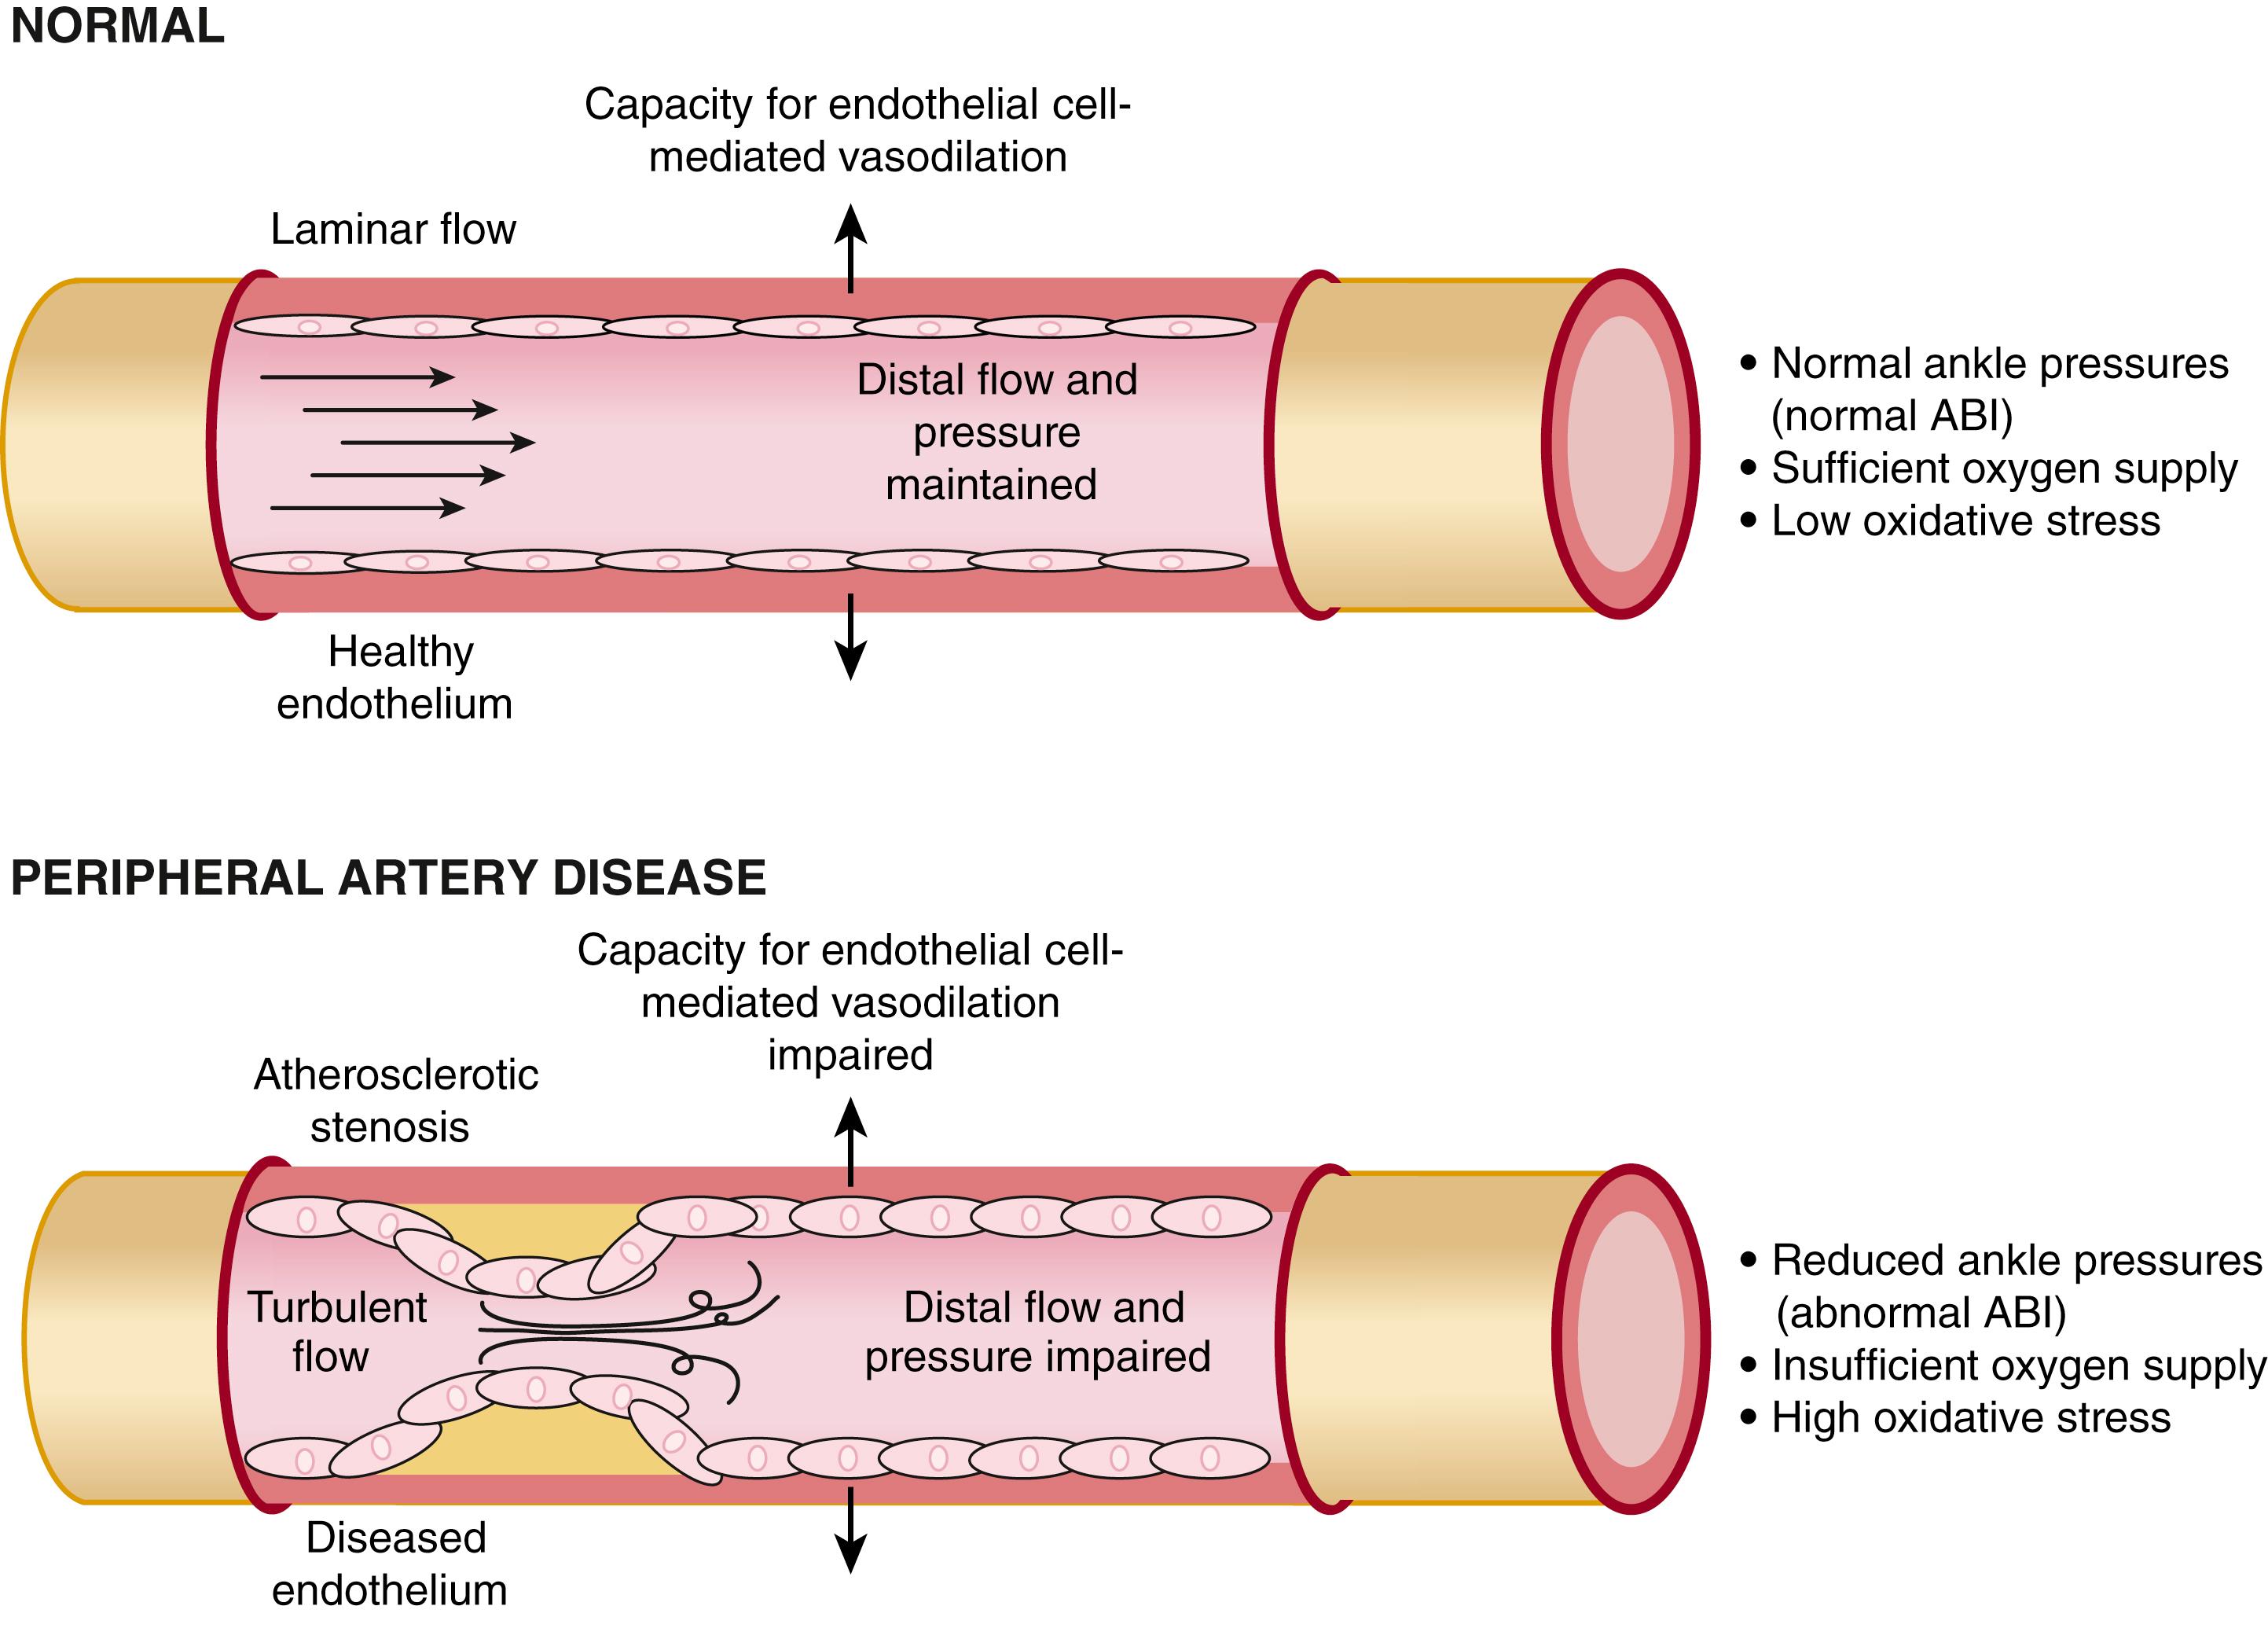 FIGURE 43.2, Effects of atherosclerotic obstruction on flow and downstream hemodynamics, oxygen supply, and oxidative stress